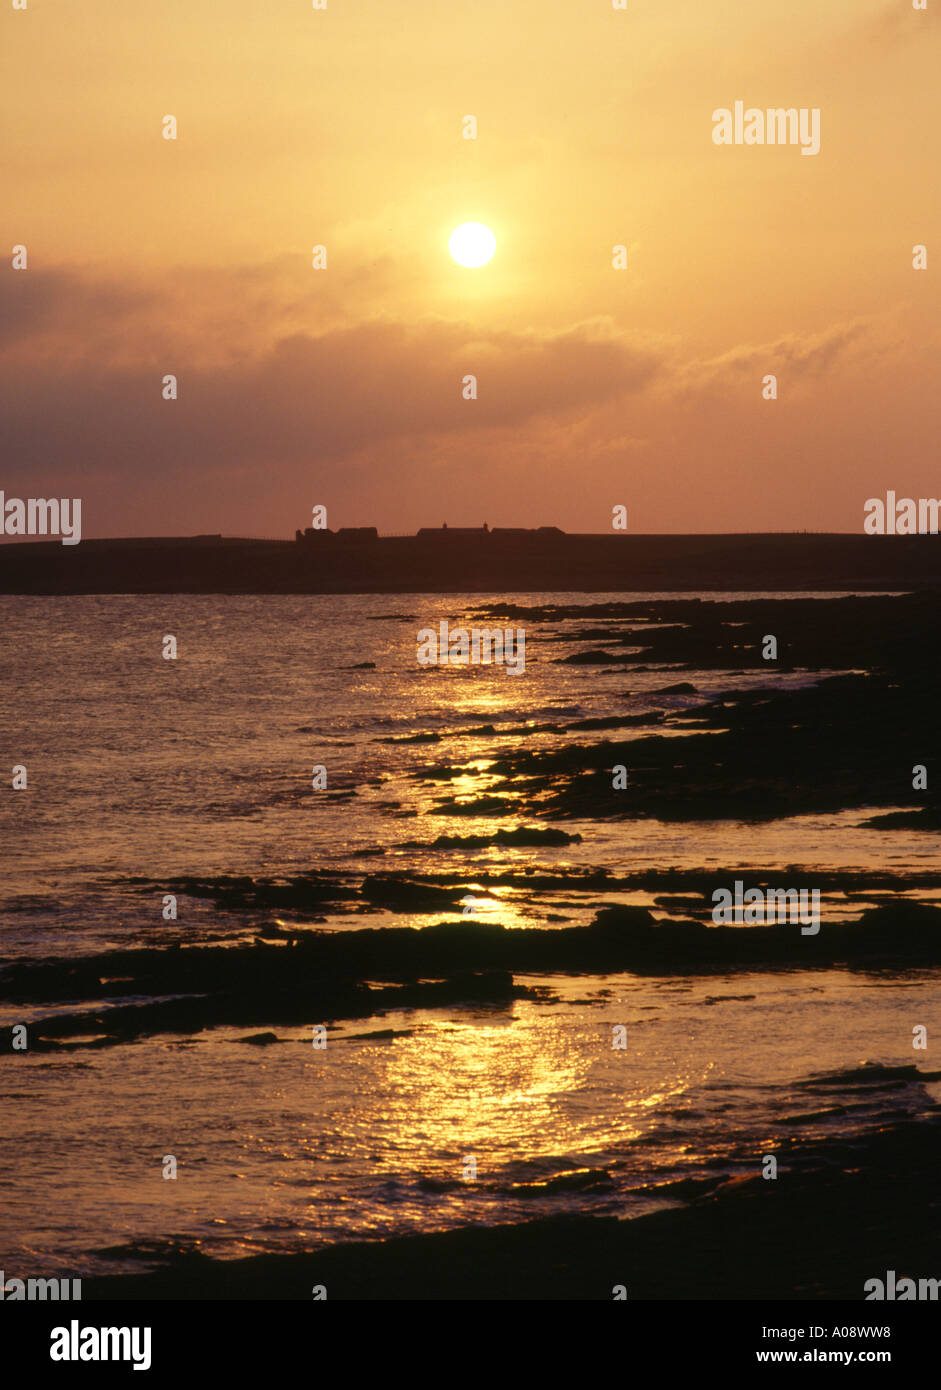 Dh spiaggia WARBETH ORKNEY Sunset over croft cottages promontorio roccioso bay shore Foto Stock